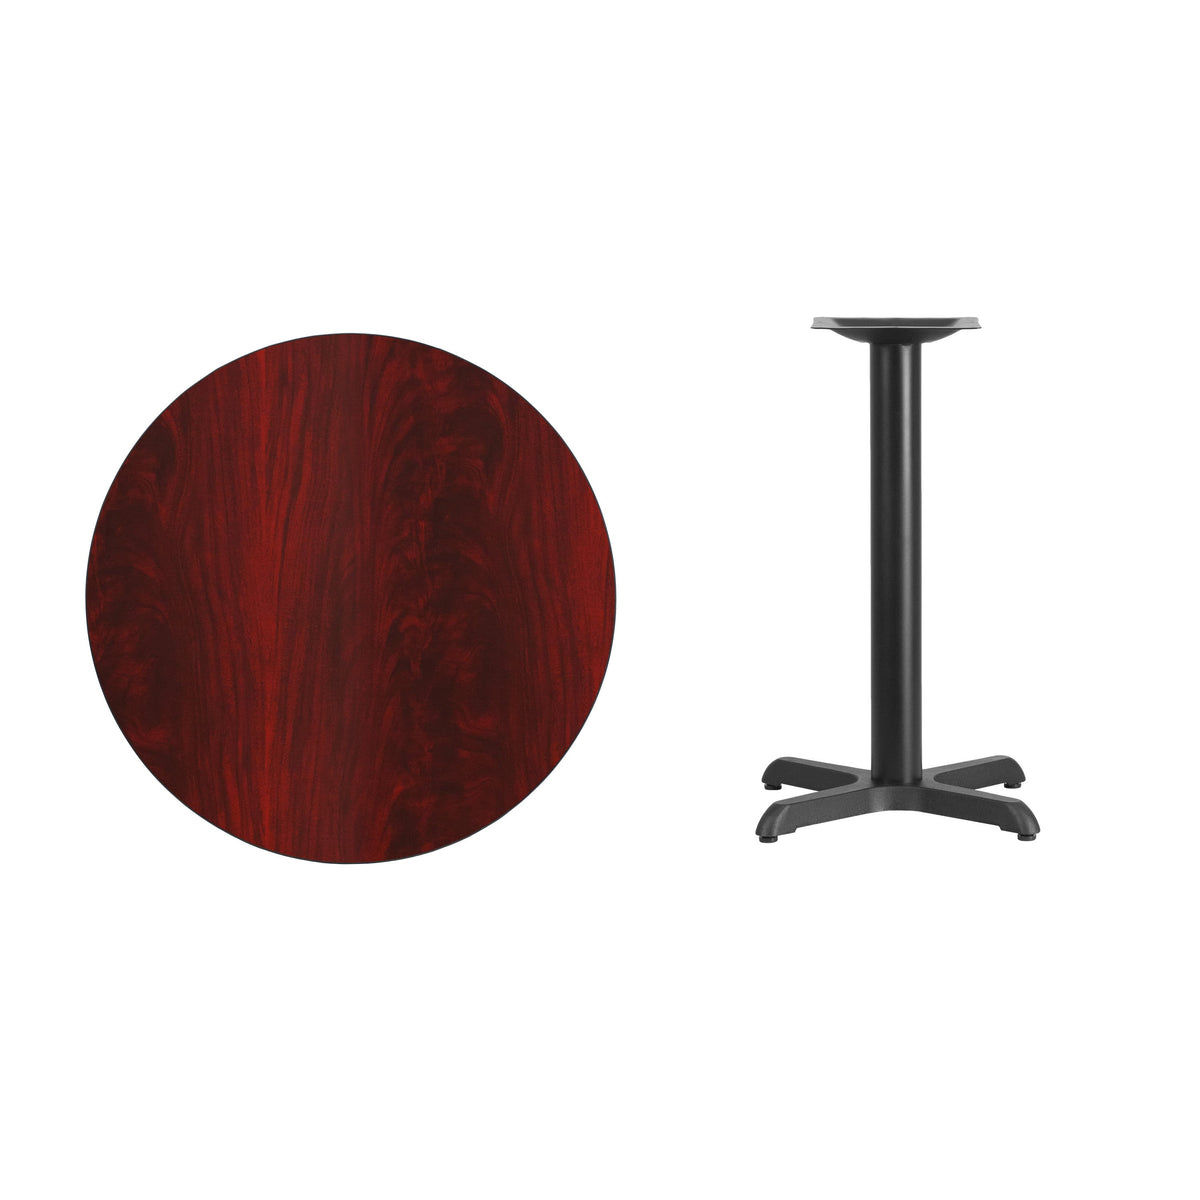 Mahogany |#| 30inch Round Mahogany Laminate Table Top with 22inch x 22inch Table Height Base